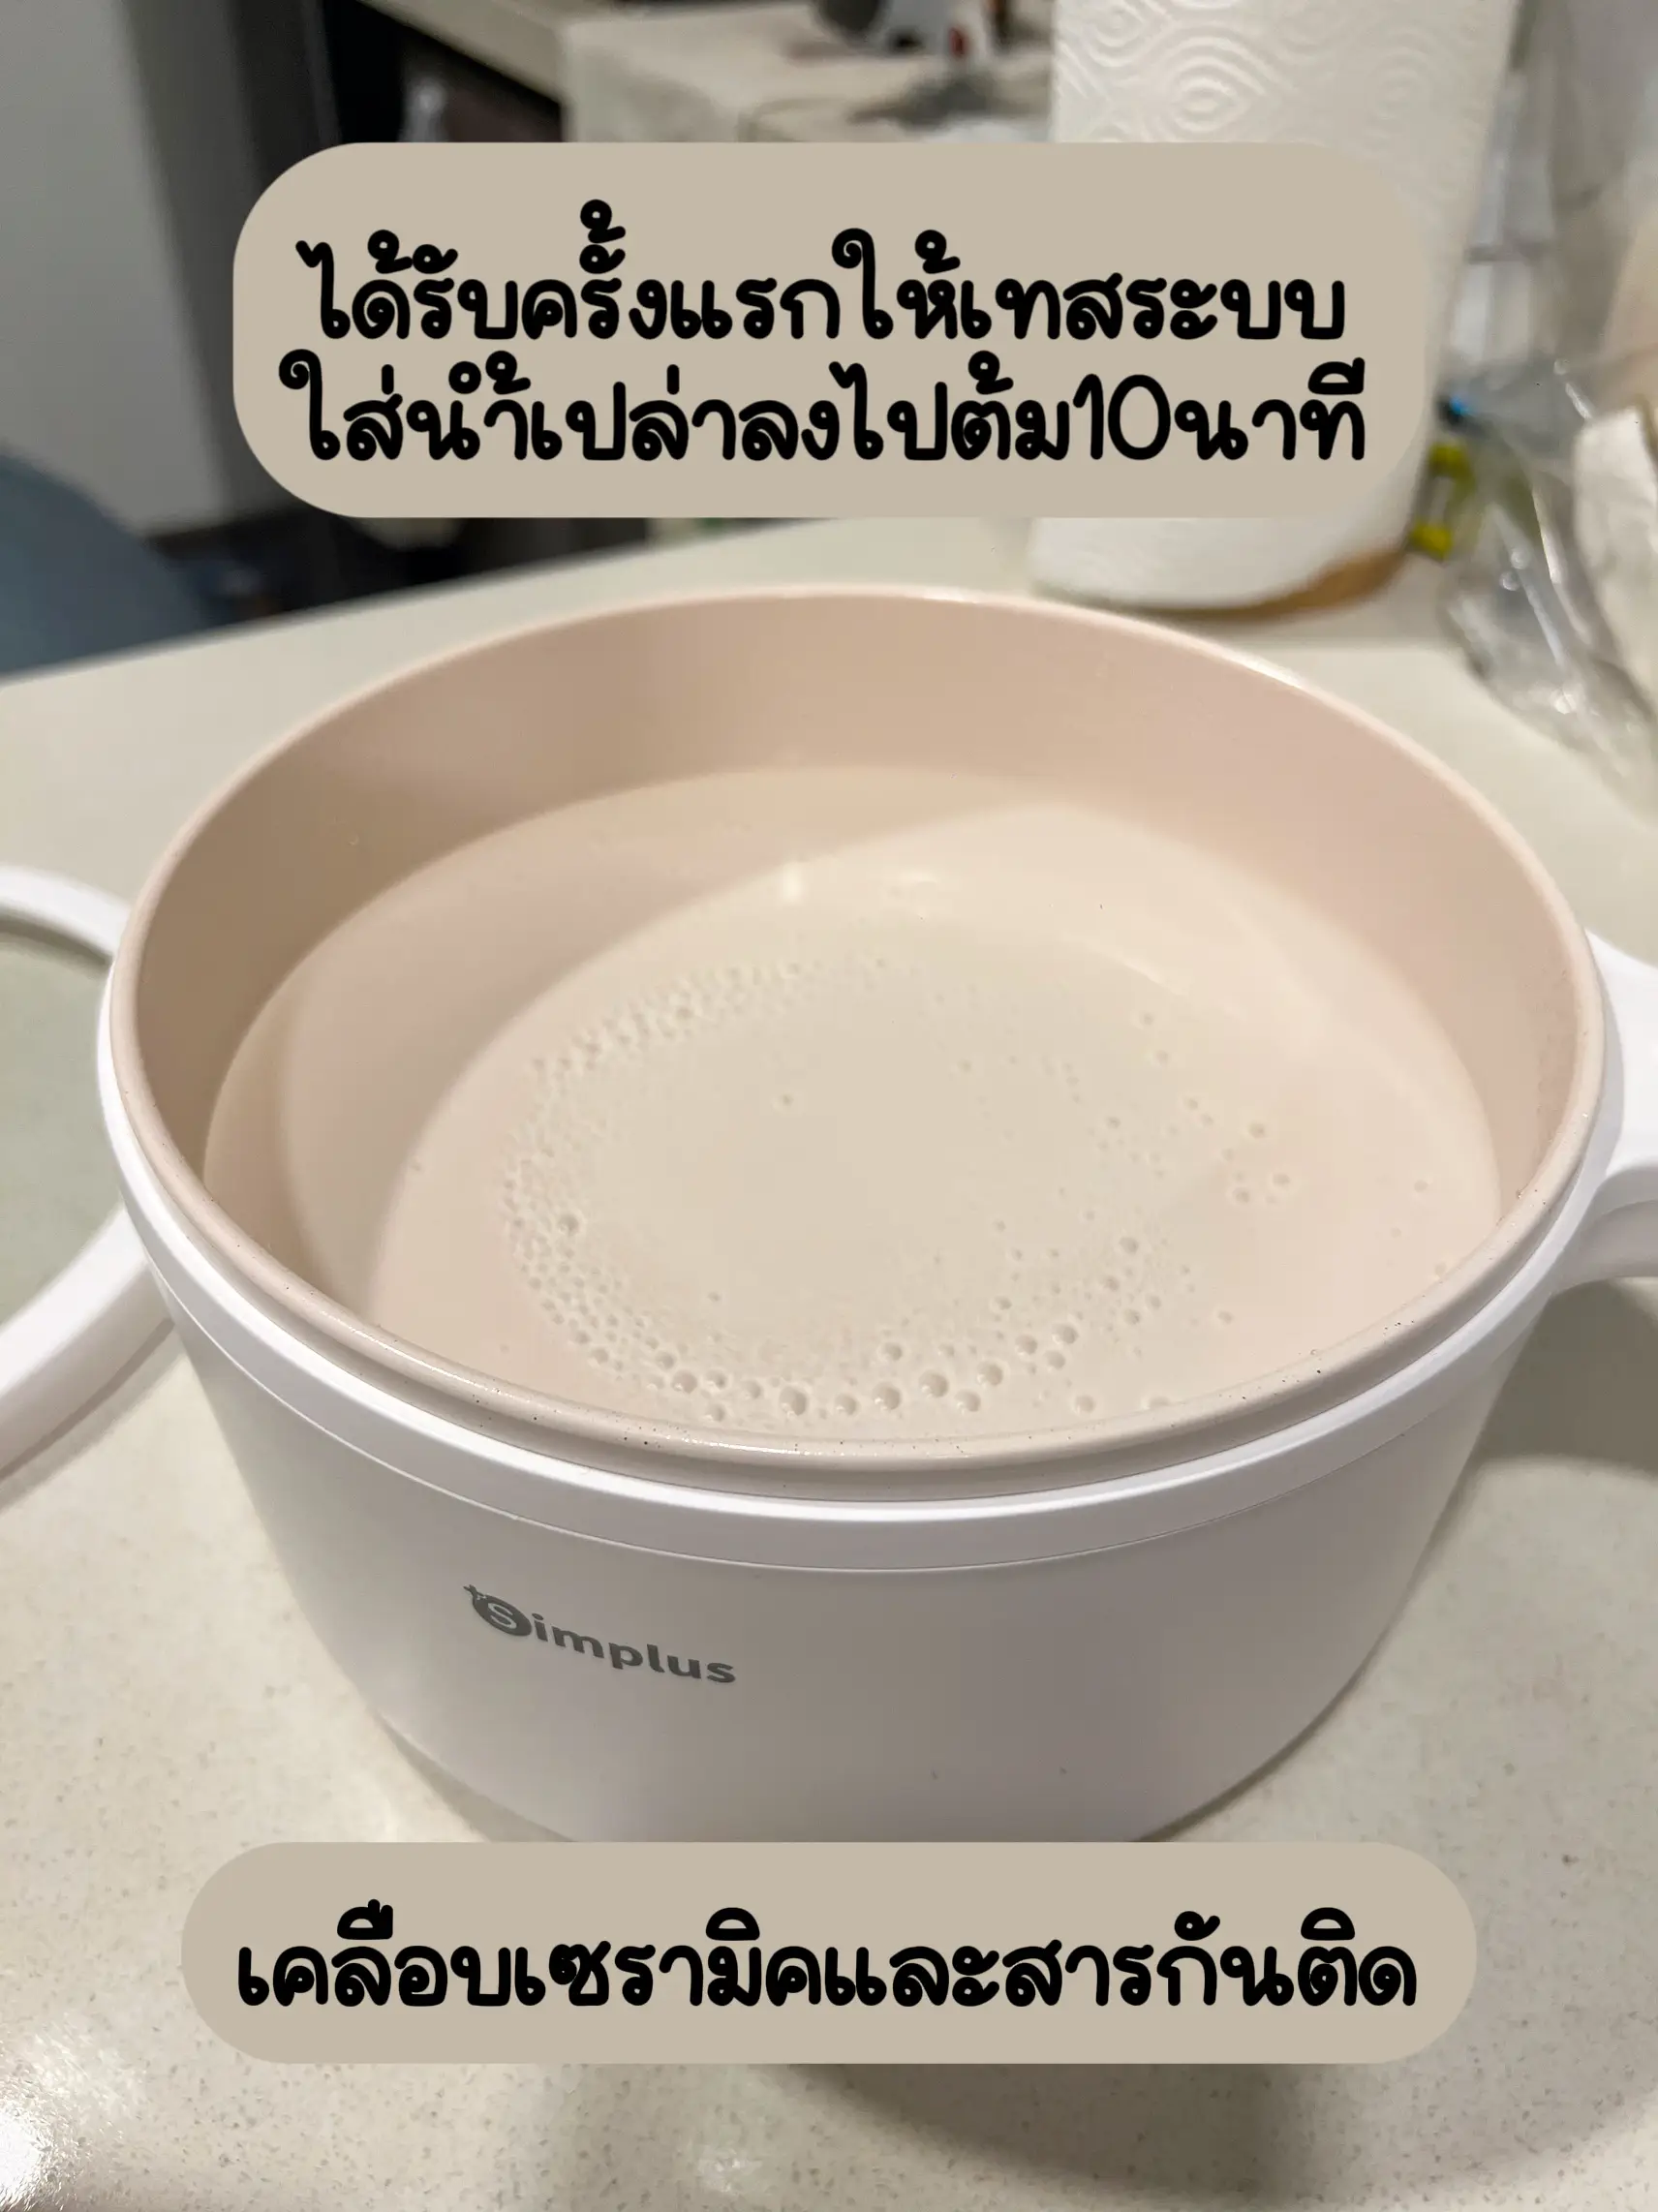 UNBOXING MY CERAMIC NONSTICK RICE COOKER AND USING FOR THE FIRST